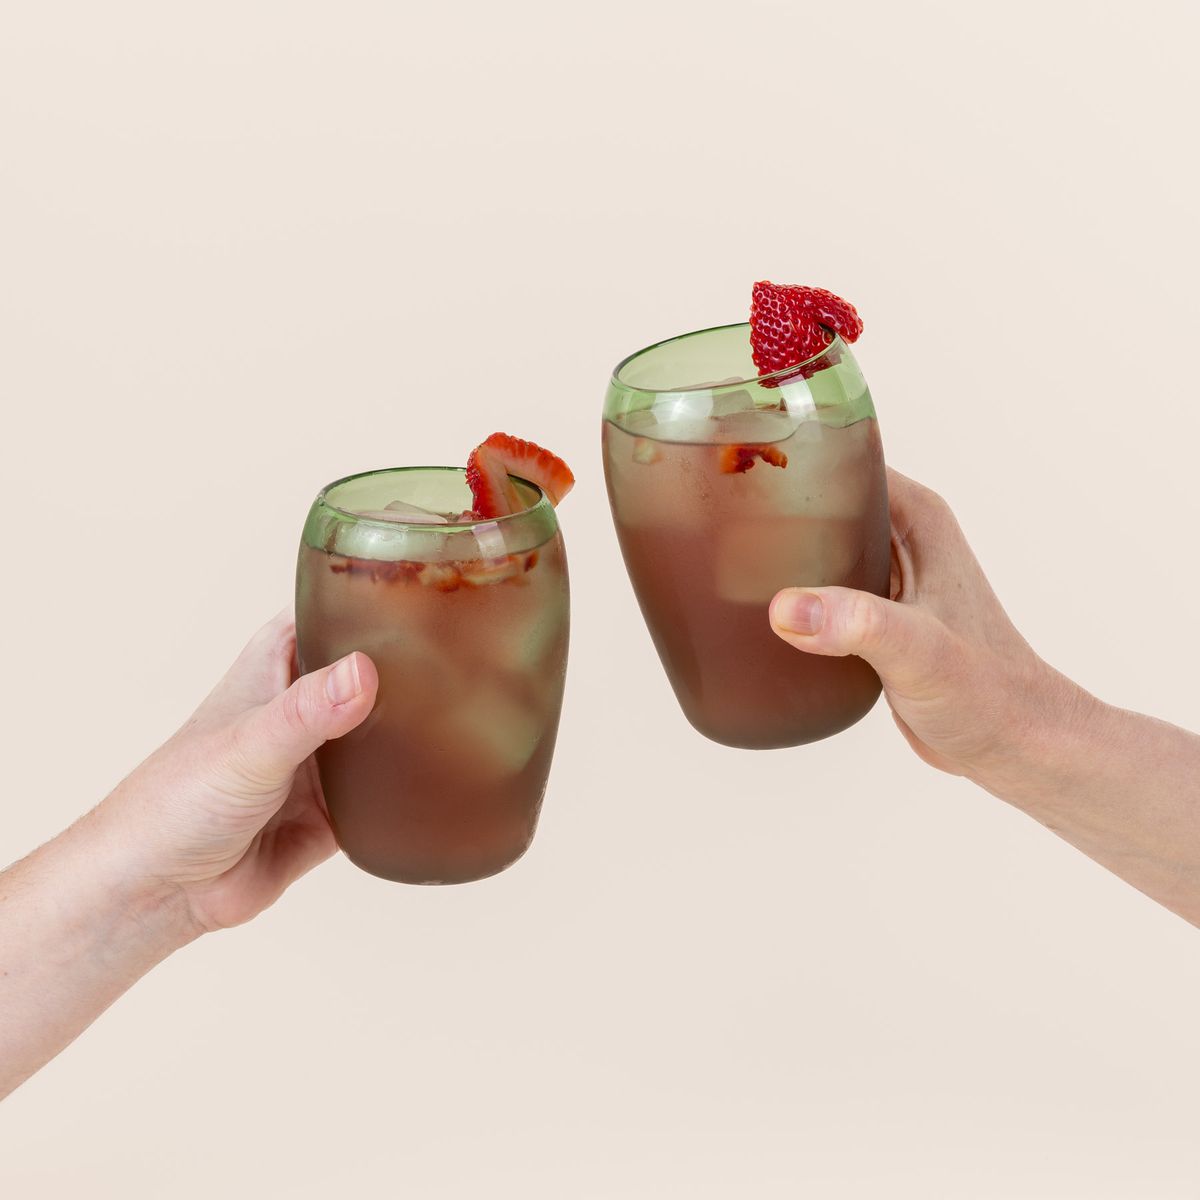 Hands are holding two tall light green glass tumblers with a slight curve inward on the top. The glasses are filled with a red cocktail with sliced strawberries on the rim.